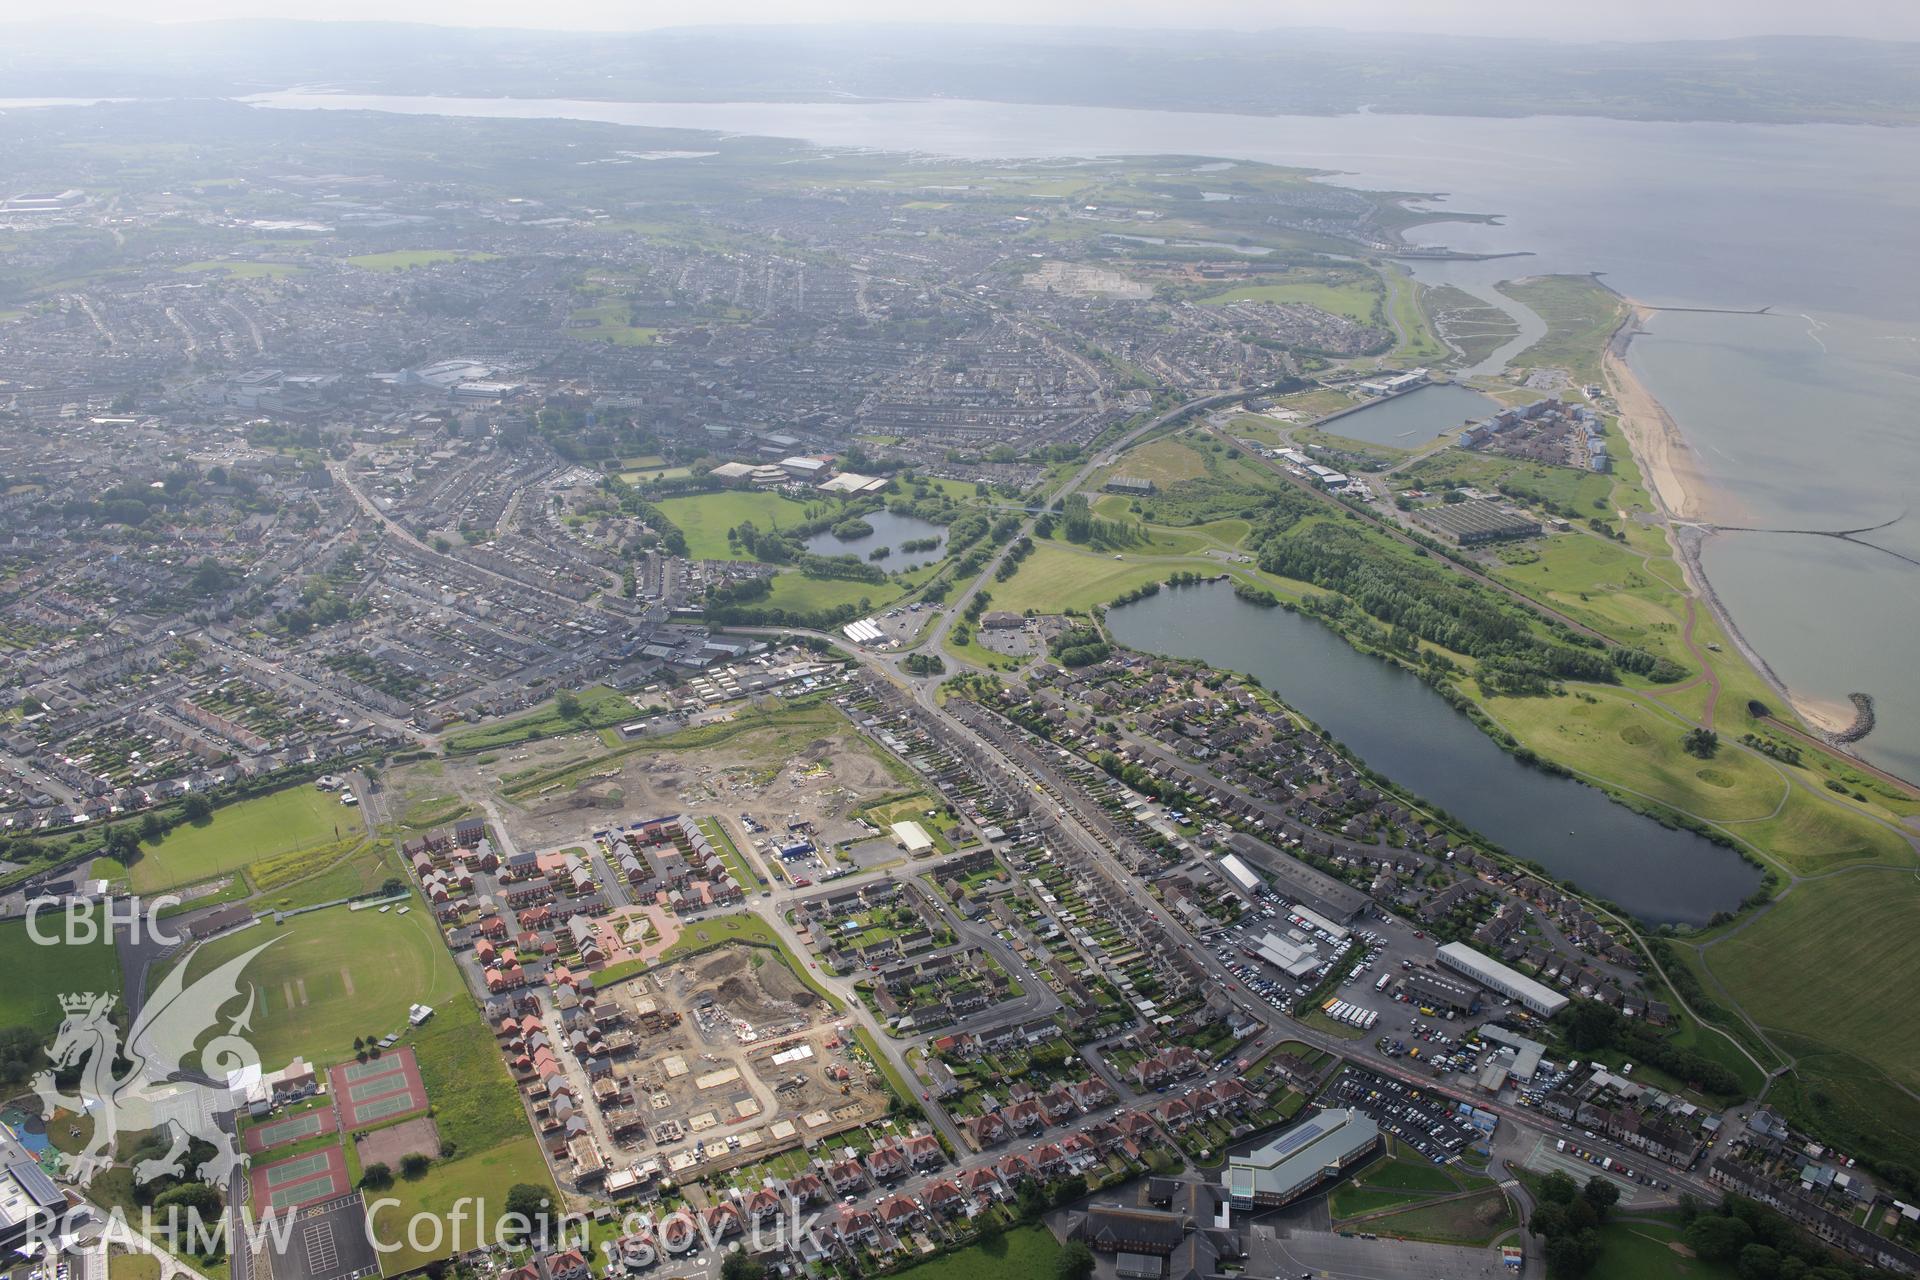 View of the town of Llanelli including the north dock; a new housing estate on the site of the old Stradey Park rugby stadium and Ysgol Gyfun y Strade (just visible, bottom left). Oblique aerial photograph taken during the Royal Commission's programme of archaeological aerial reconnaissance by Toby Driver on 15th June 2015.